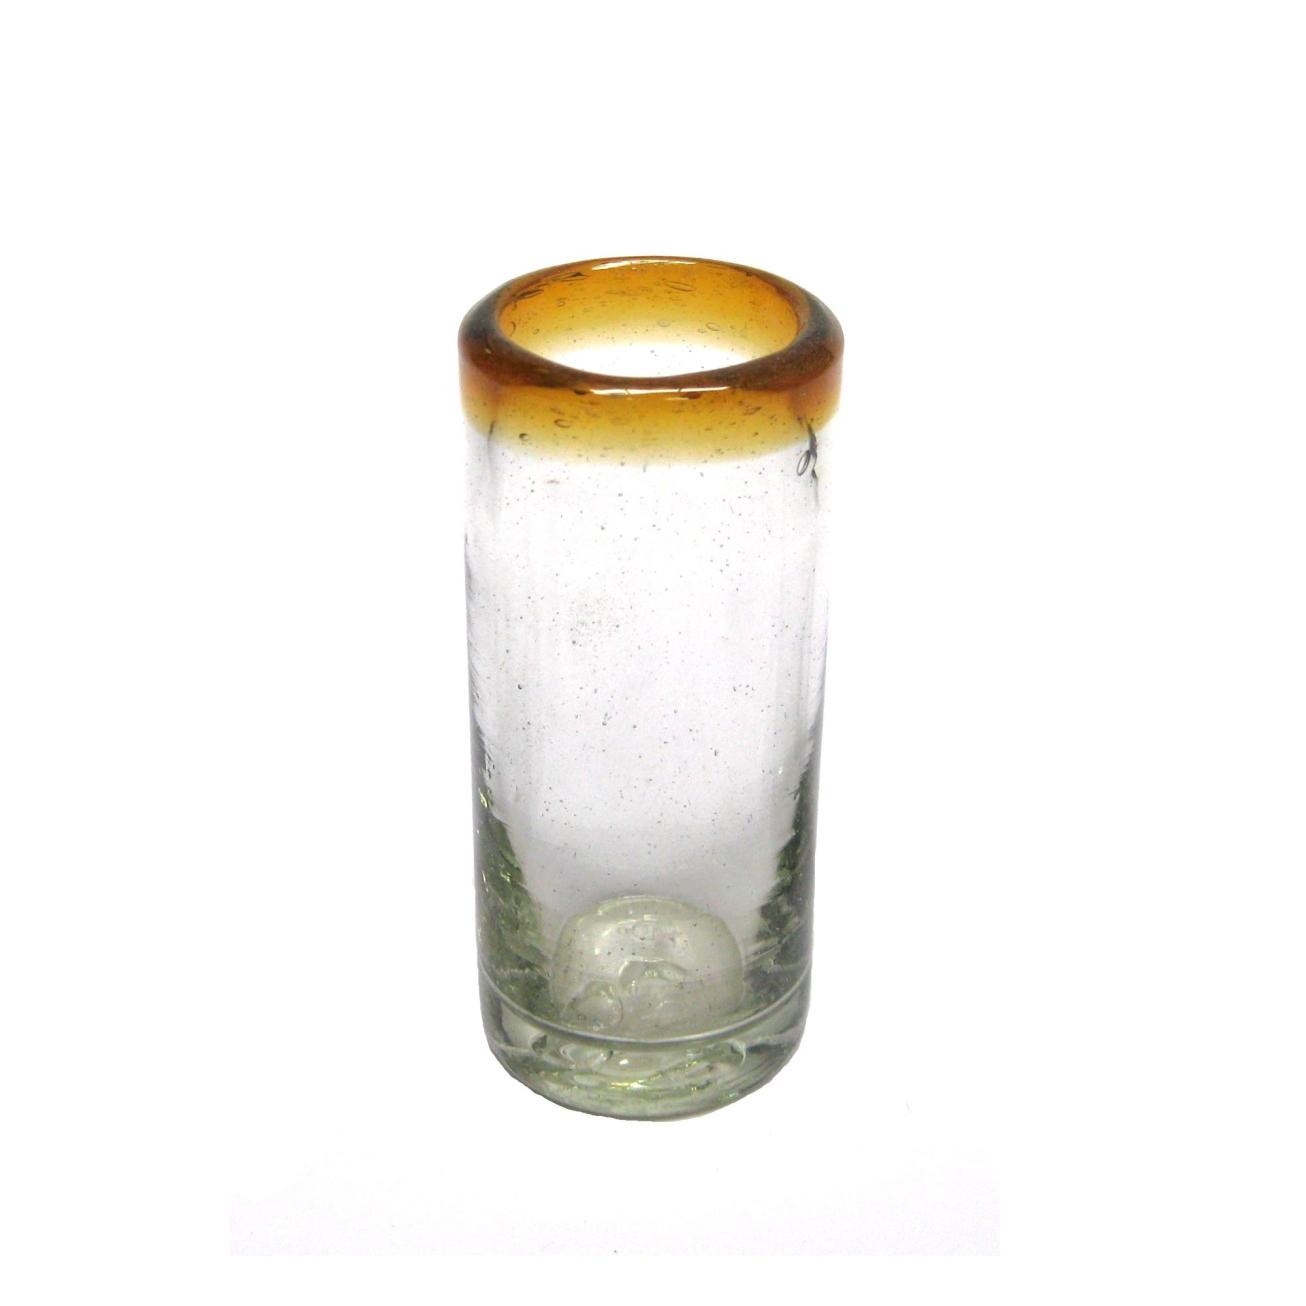 Wholesale Tequila Shot Glasses / Amber Rim 2 oz Tequila Shot Glasses  / These shot glasses bordered in amber color are perfect for sipping your favourite tequila or any other liquor.